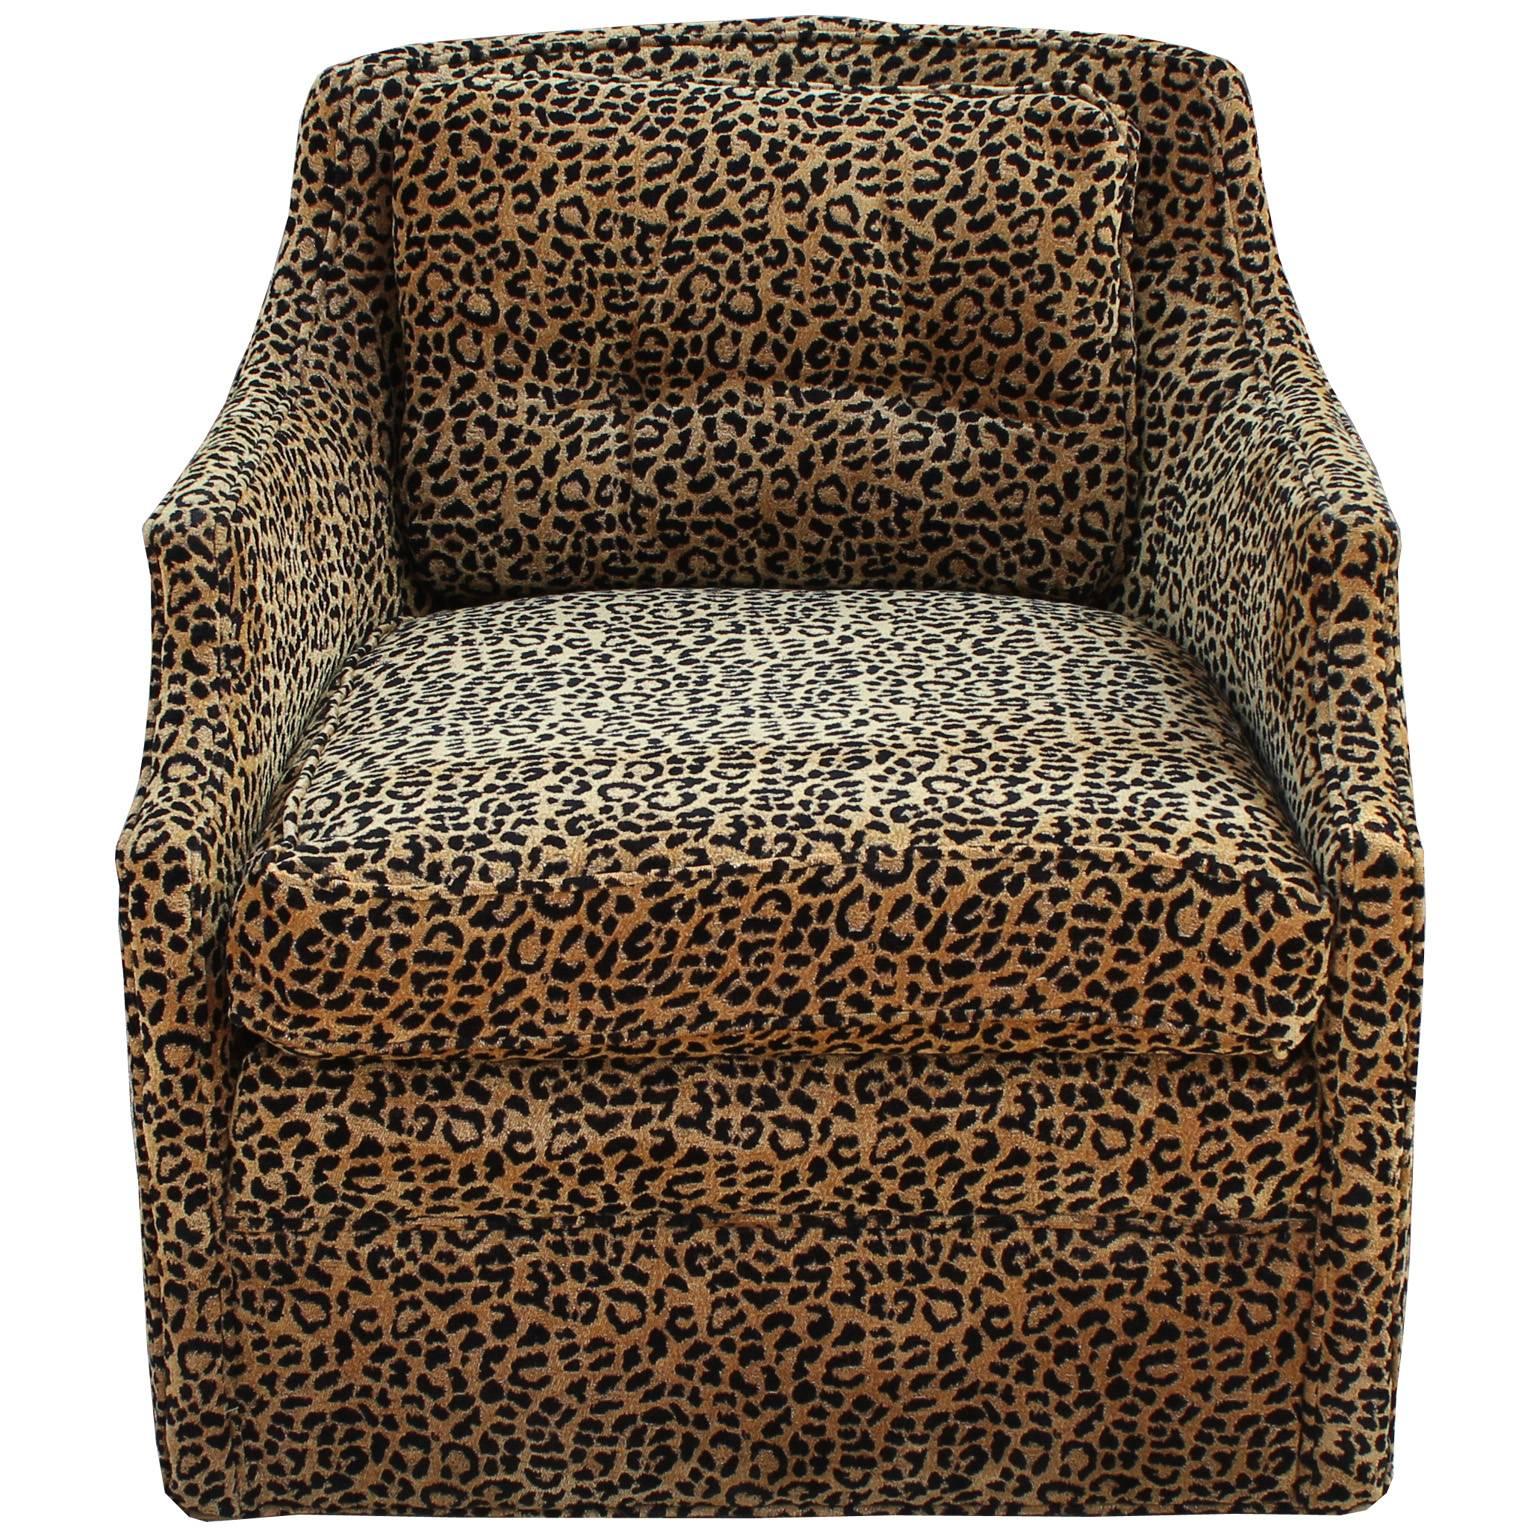 Luxe pair of swivel armchairs attributed to Baker Furniture. Chair backs have gently curved, feminine lines. Upholstered in a textural leopard fabric. Perfect in a transitional, traditional, or Hollywood Regency space. Fabric is vintage but has no